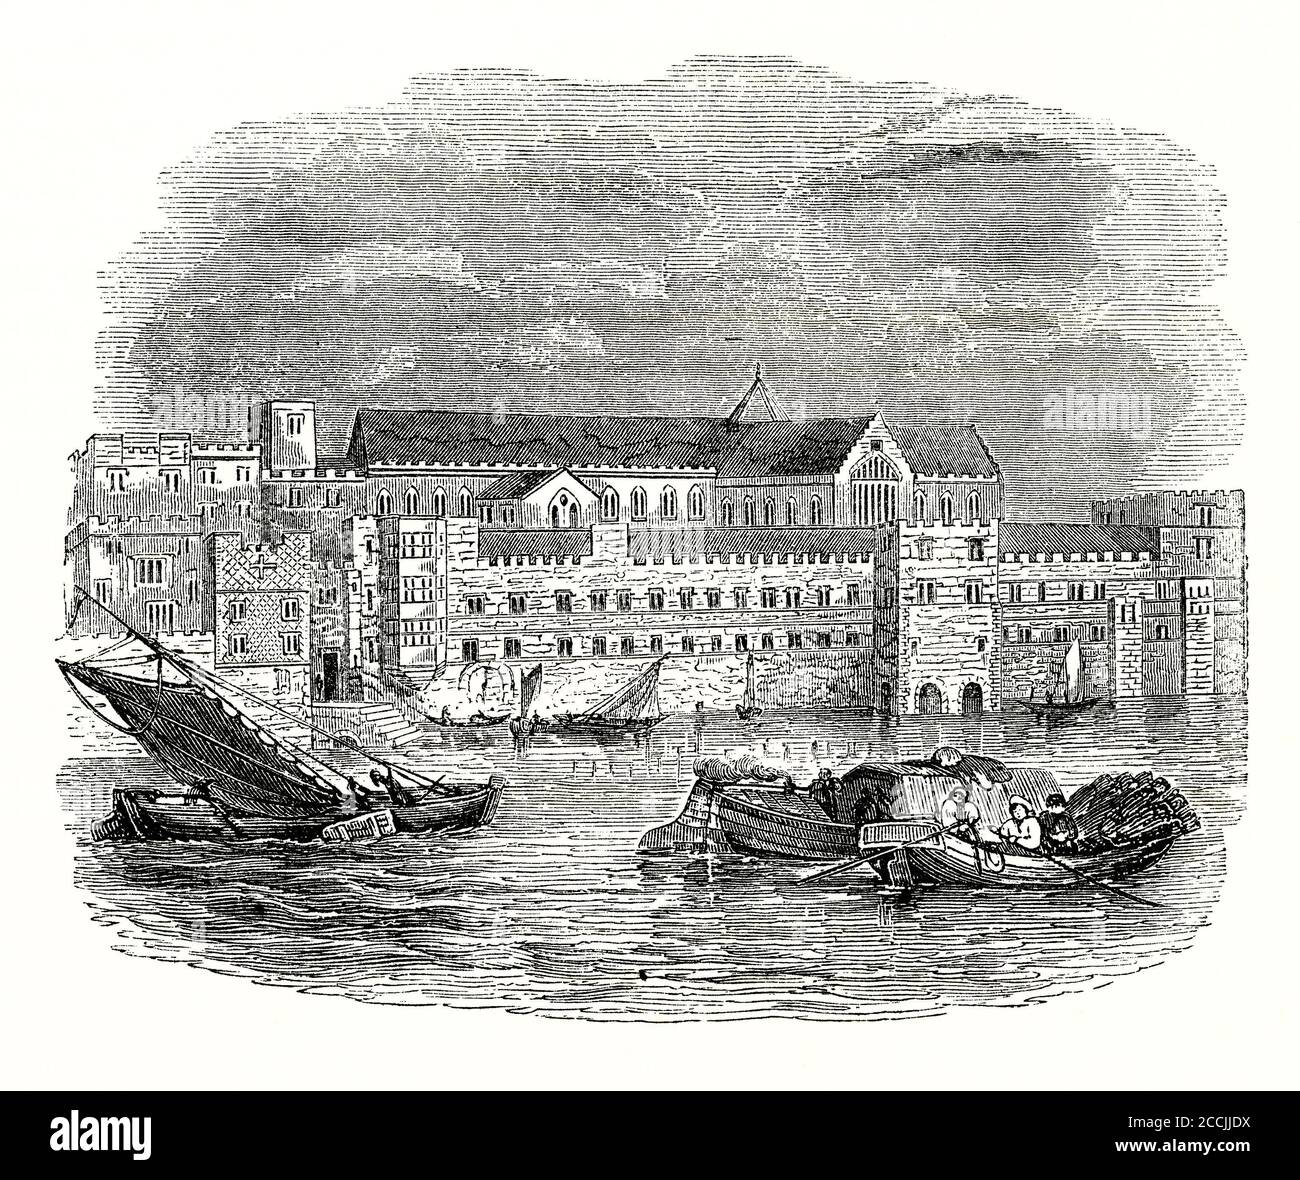 An old engraving of the Savoy Hospital (formerly the Savoy Palace), the Strand, London, England, UK in the 1600s seen from the River Thames. The Savoy Palace was the home of John of Gaunt until it was destroyed during the Peasants' Revolt of 1381. It was here that Henry VII founded the Savoy Hospital for poor people. It was the most impressive hospital of its time in the country and the first to benefit from permanent medical staff. Each evening the gates were opened and the poor entered and were allotted a bed for the night. In the morning they left (though the sick were allowed to remain). Stock Photo